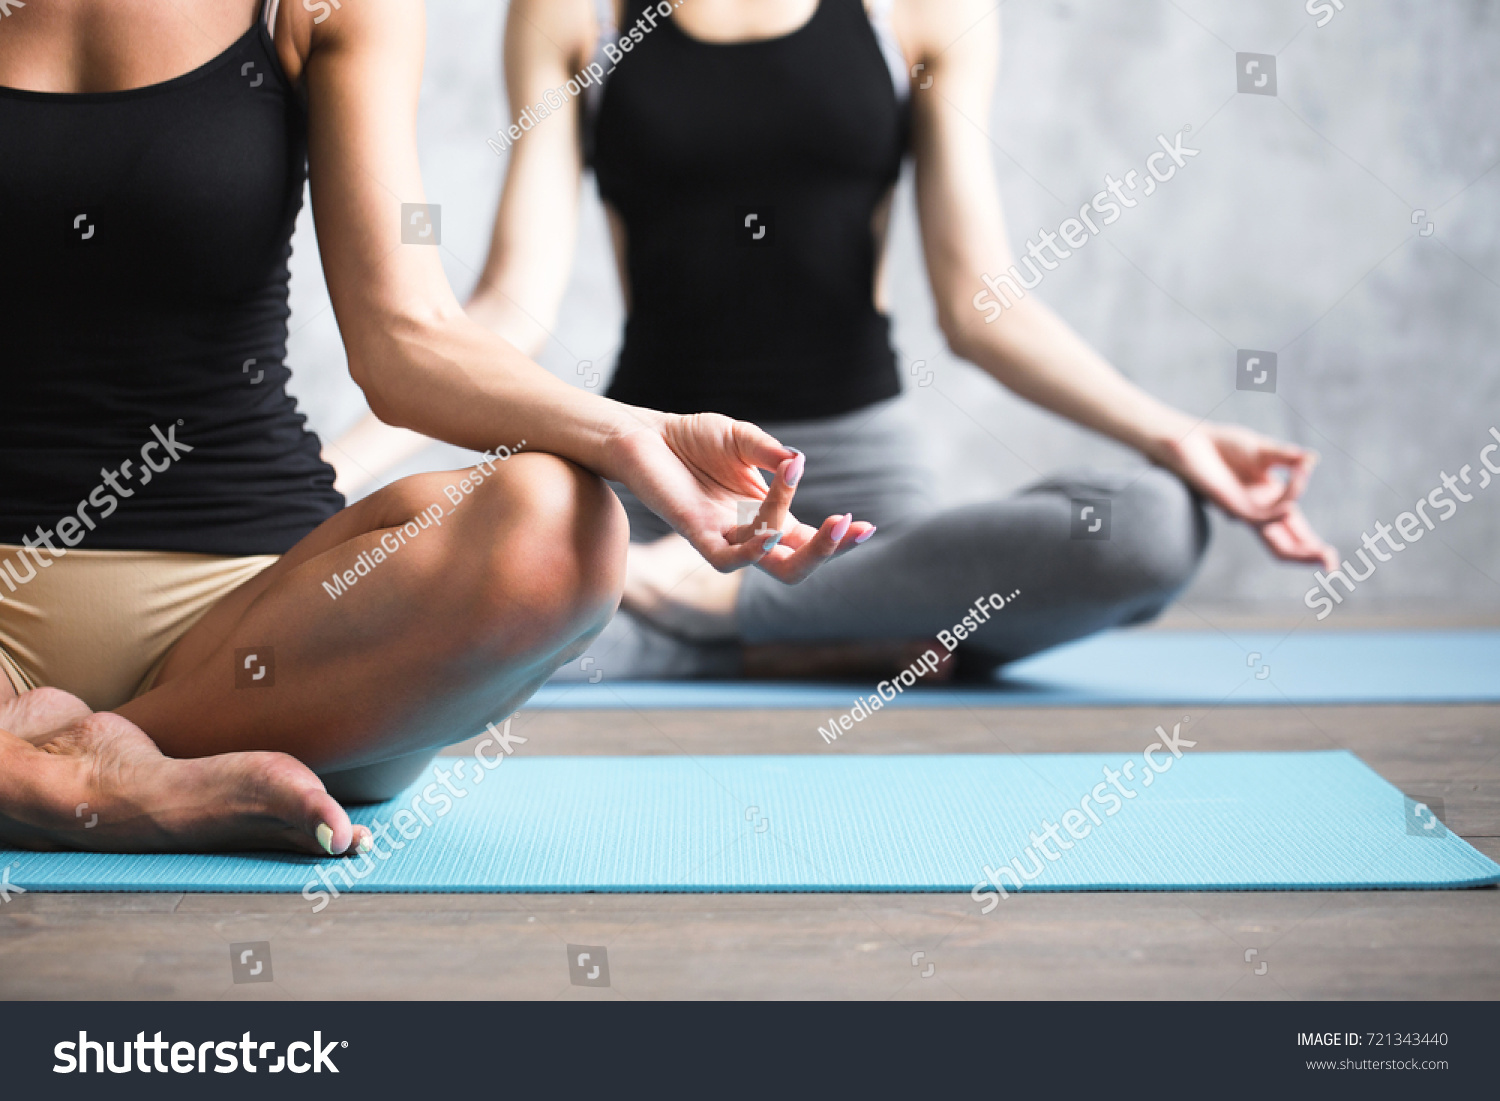 stock-photo-group-people-practicing-yoga-indoors-close-up-hands-in-meditating-gesture-copy-space-721343440